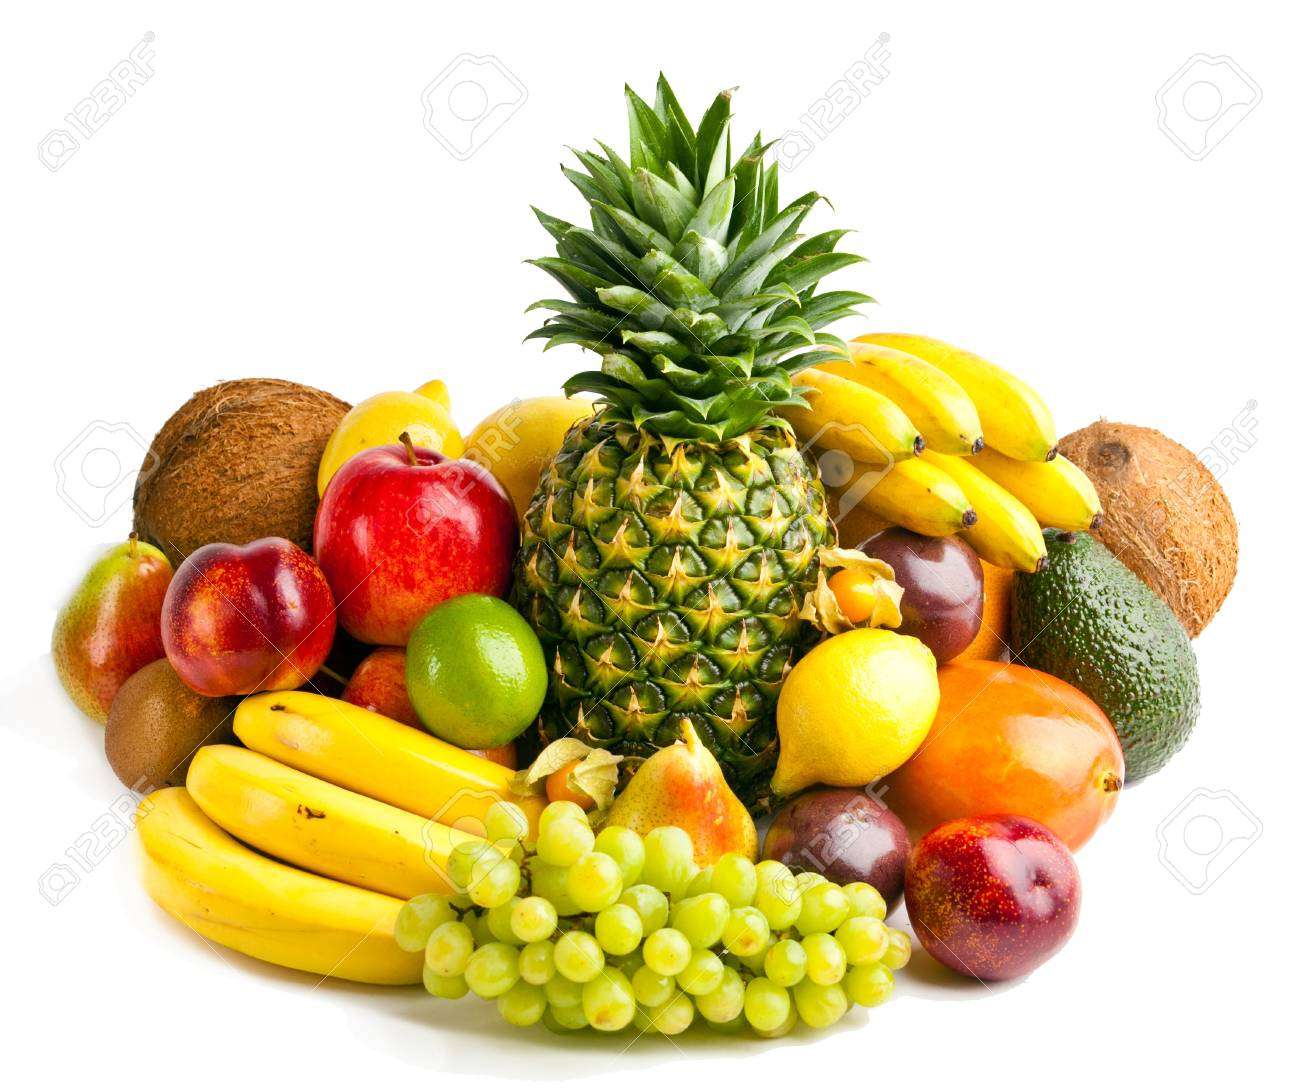 fruits and vegetables online puzzle